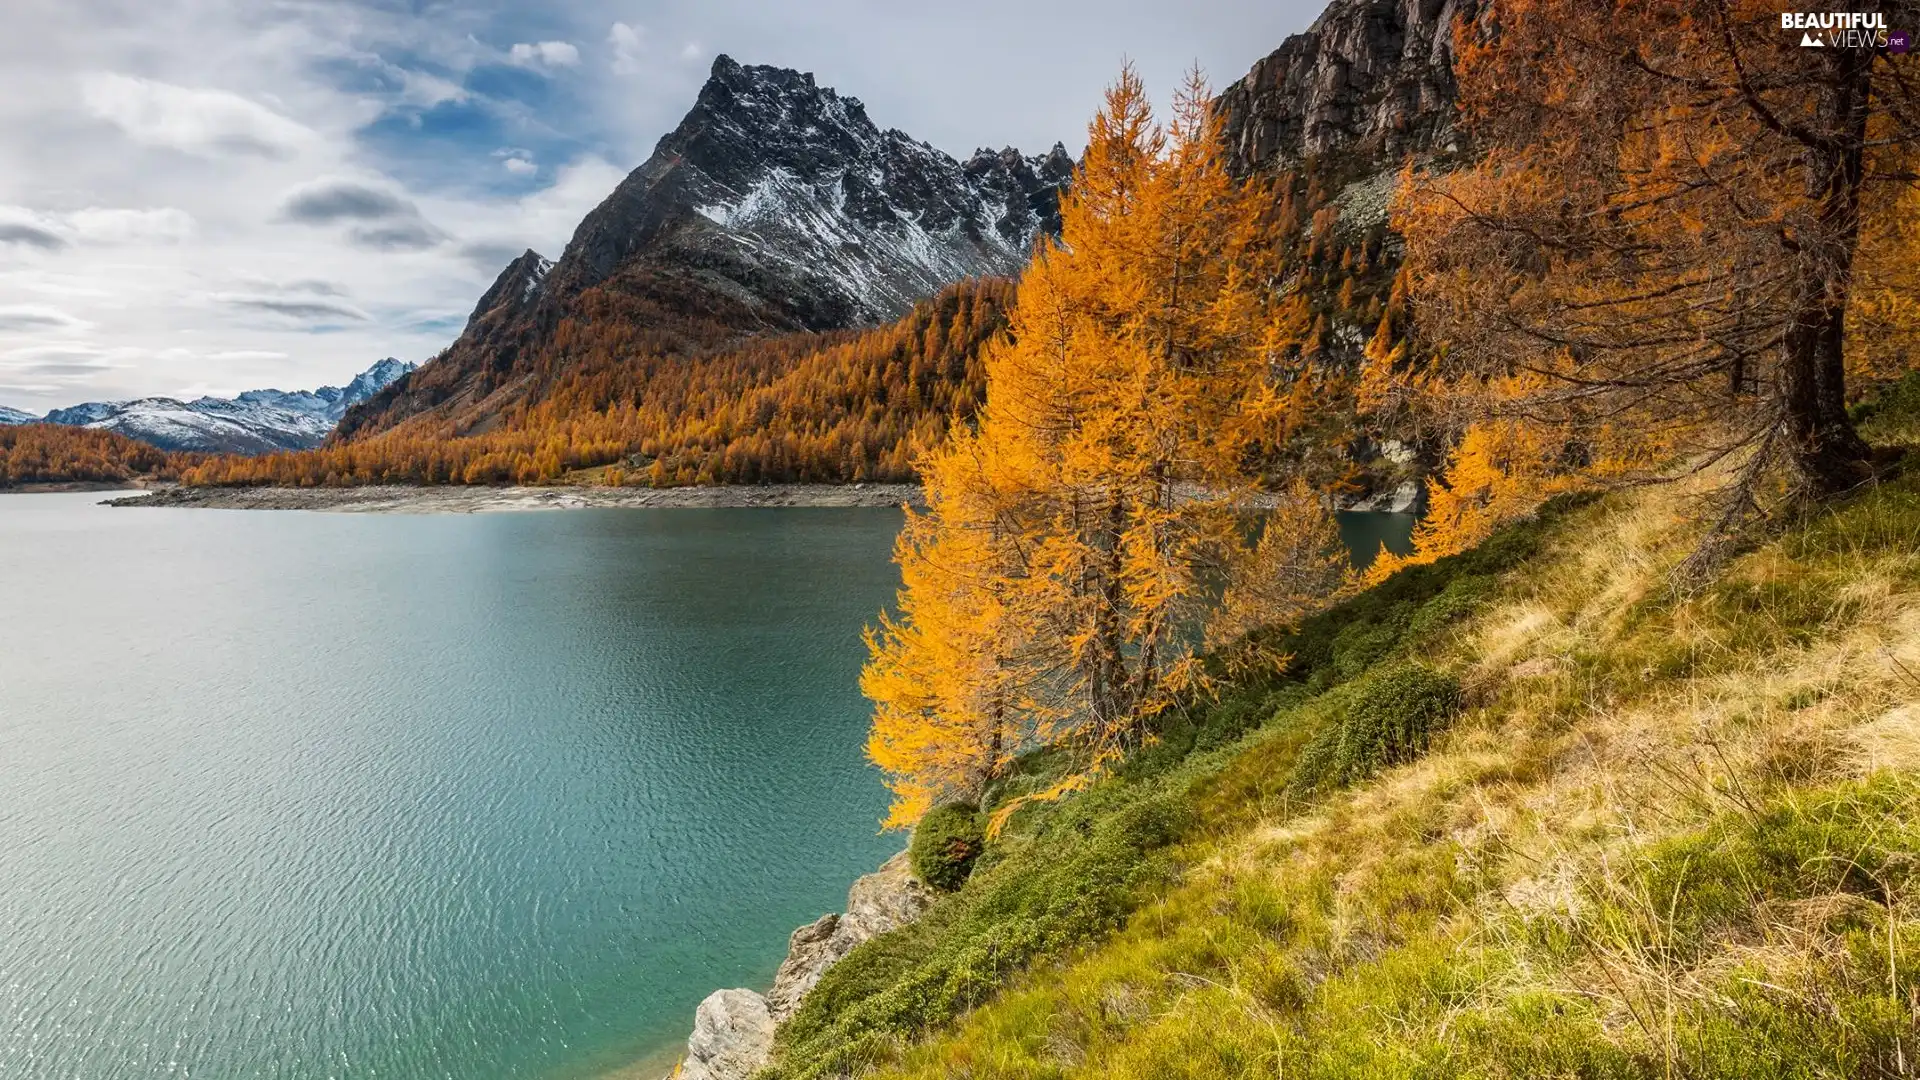 trees, lake, autumn, Yellowed, Mountains, viewes, clouds